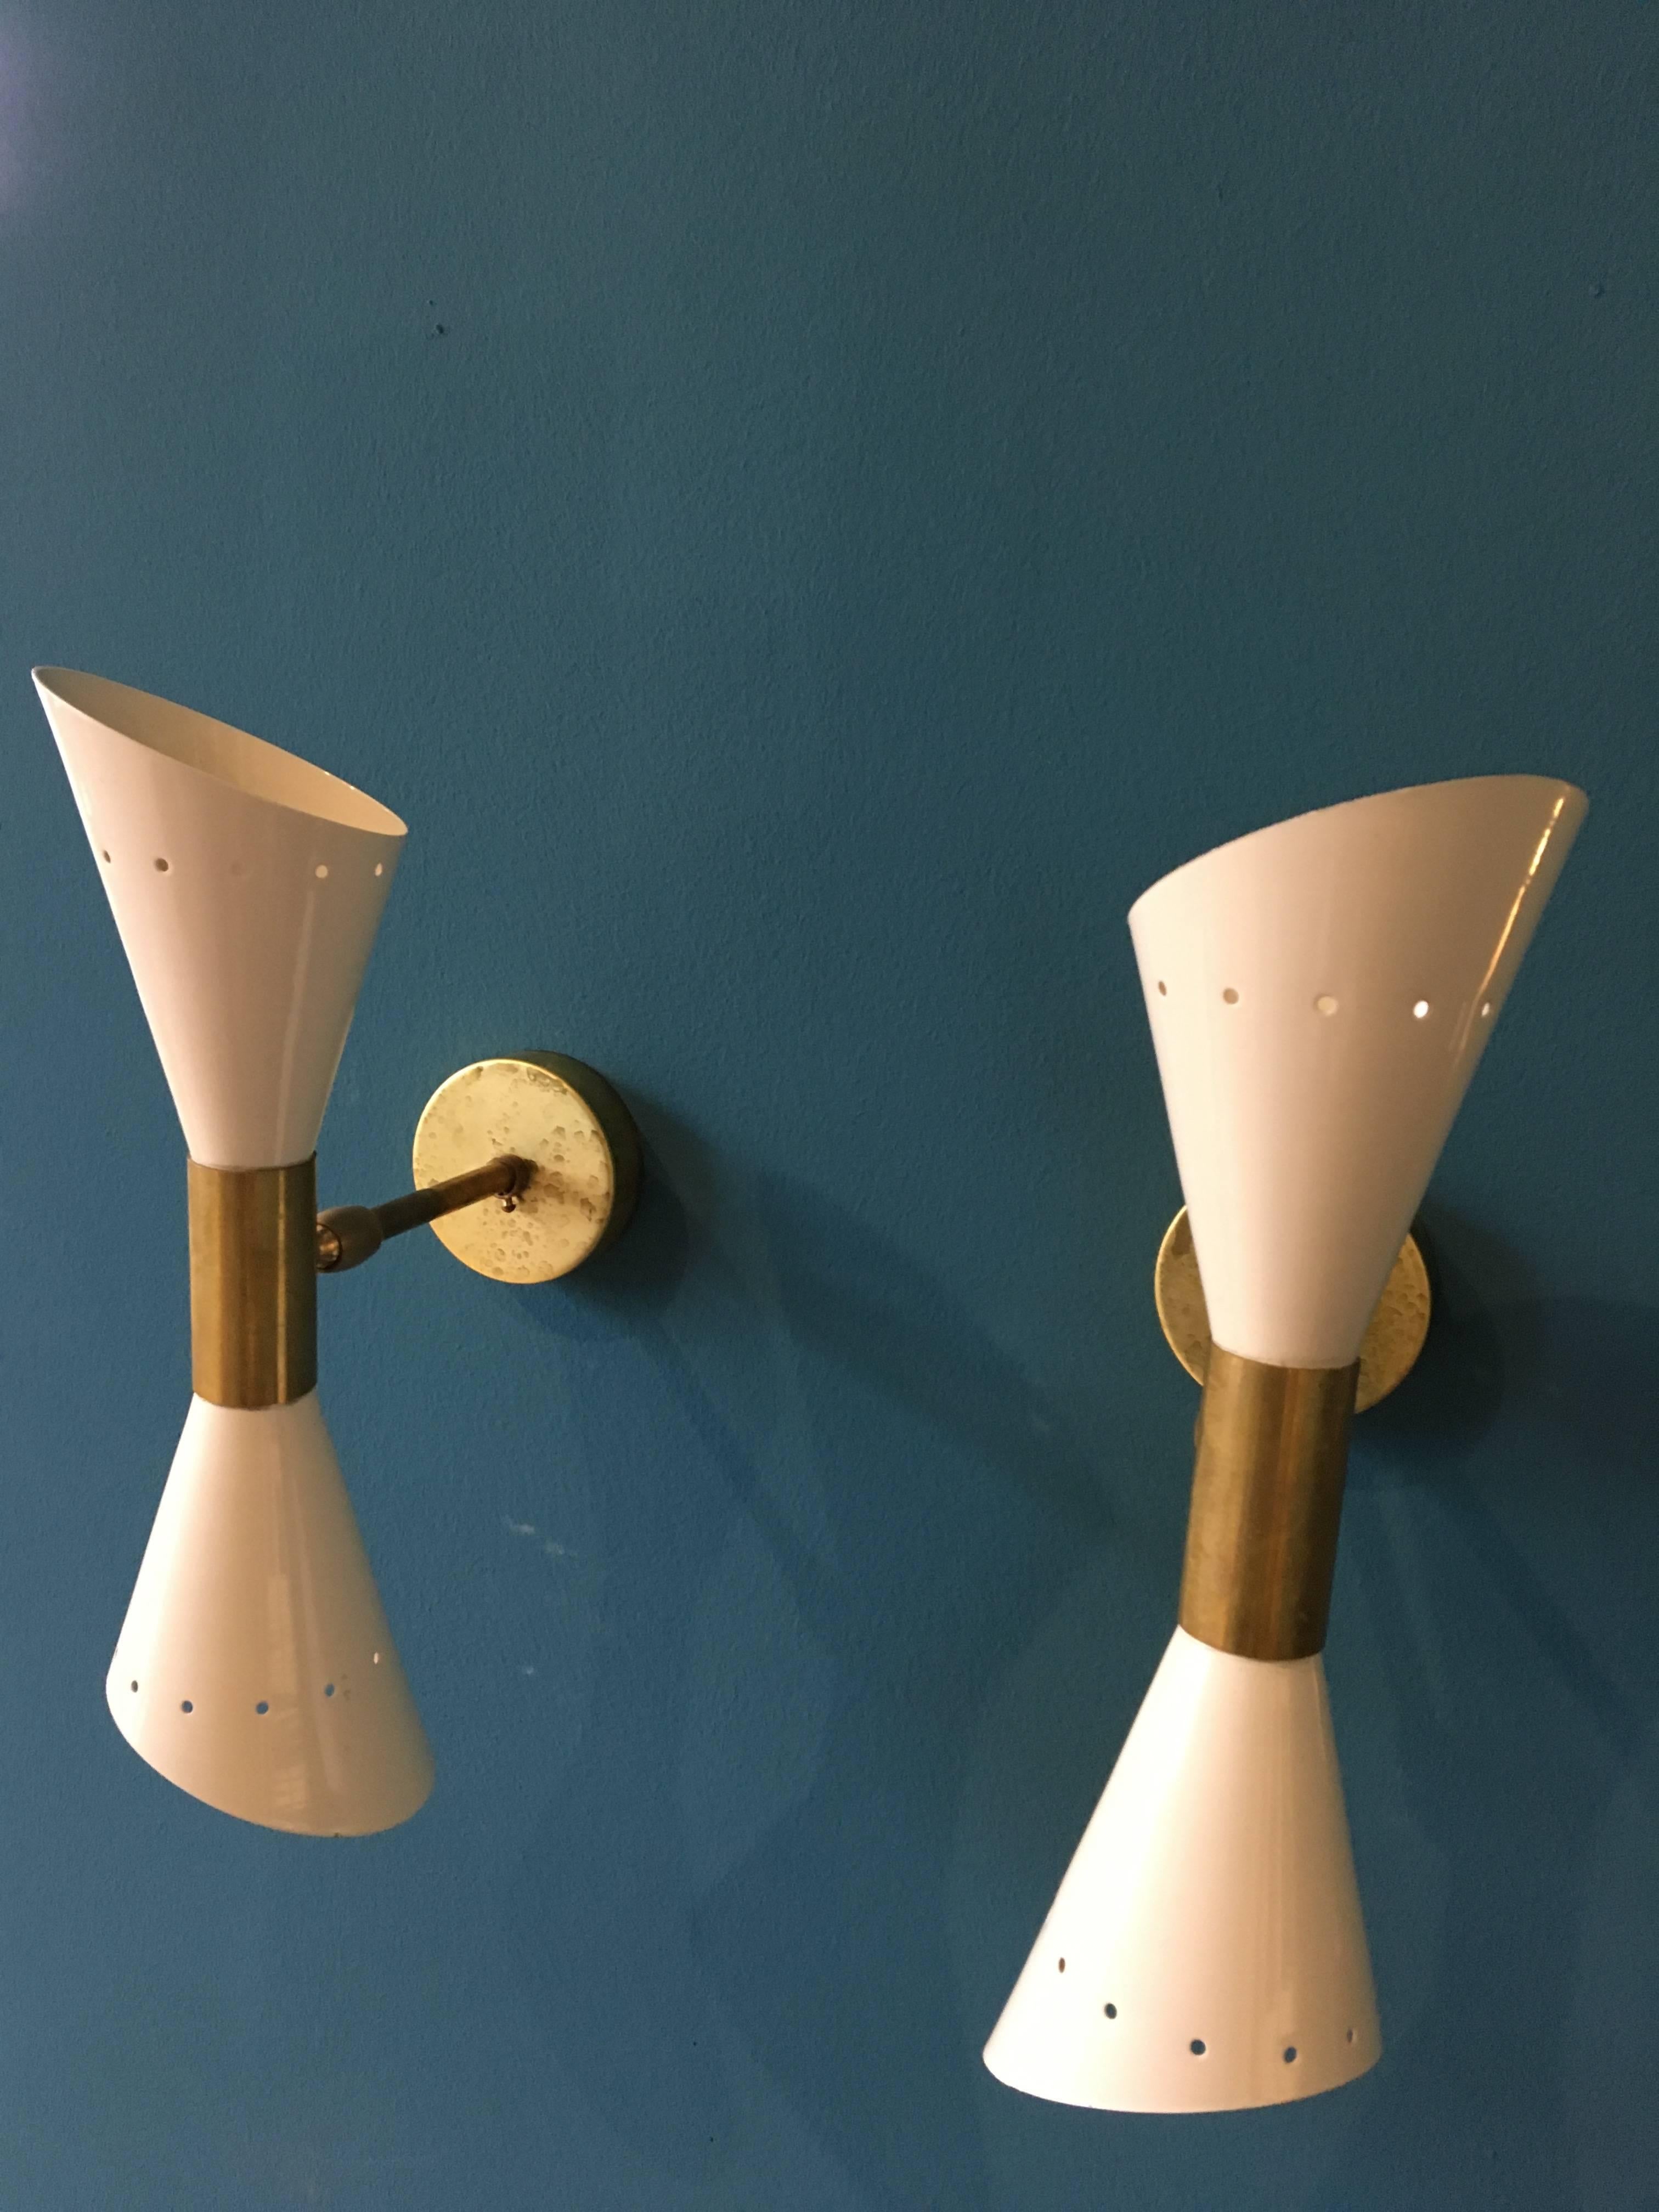 - Pair of Italian sconces with brass elements
- Fully adjustable and rotatable
- Each light uses two E14 bulbs 
- This allows it to light in both directions, up and down
- It is possible to use only one bulb at a time
- No dents, rewired, and ready